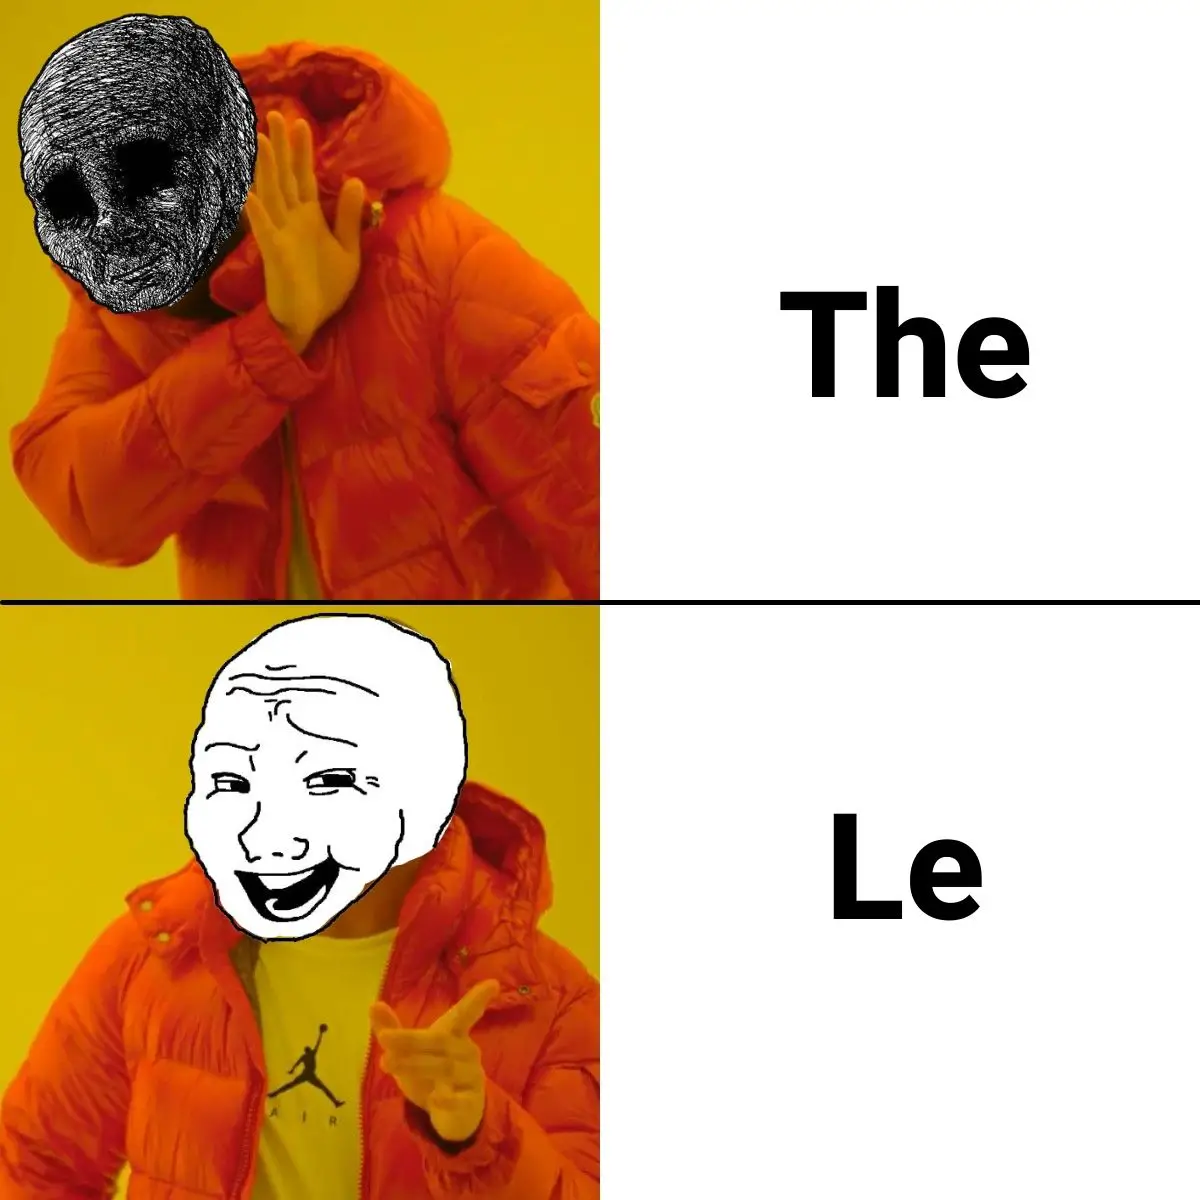 Le Meaning in Meme